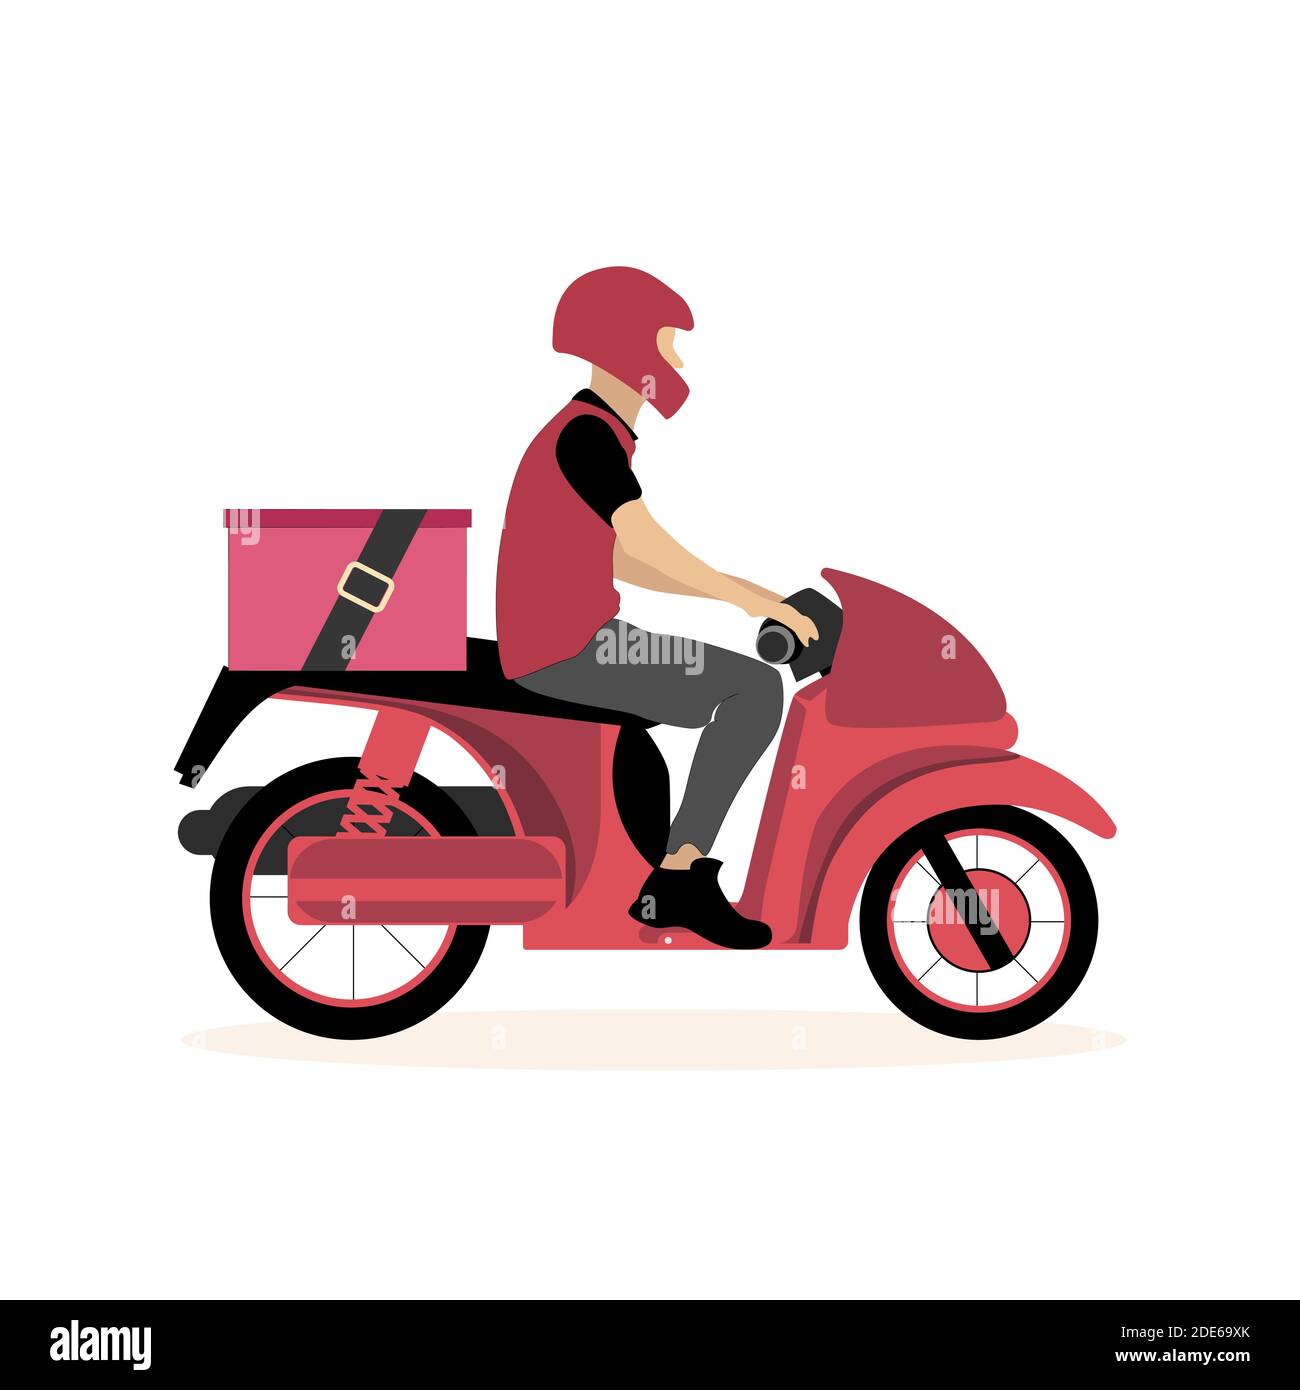 Scooter courier cartoon isolated on white background. Vector scooter delivery, fast service by moped, food courier with box for pizza illustration Stock Vector